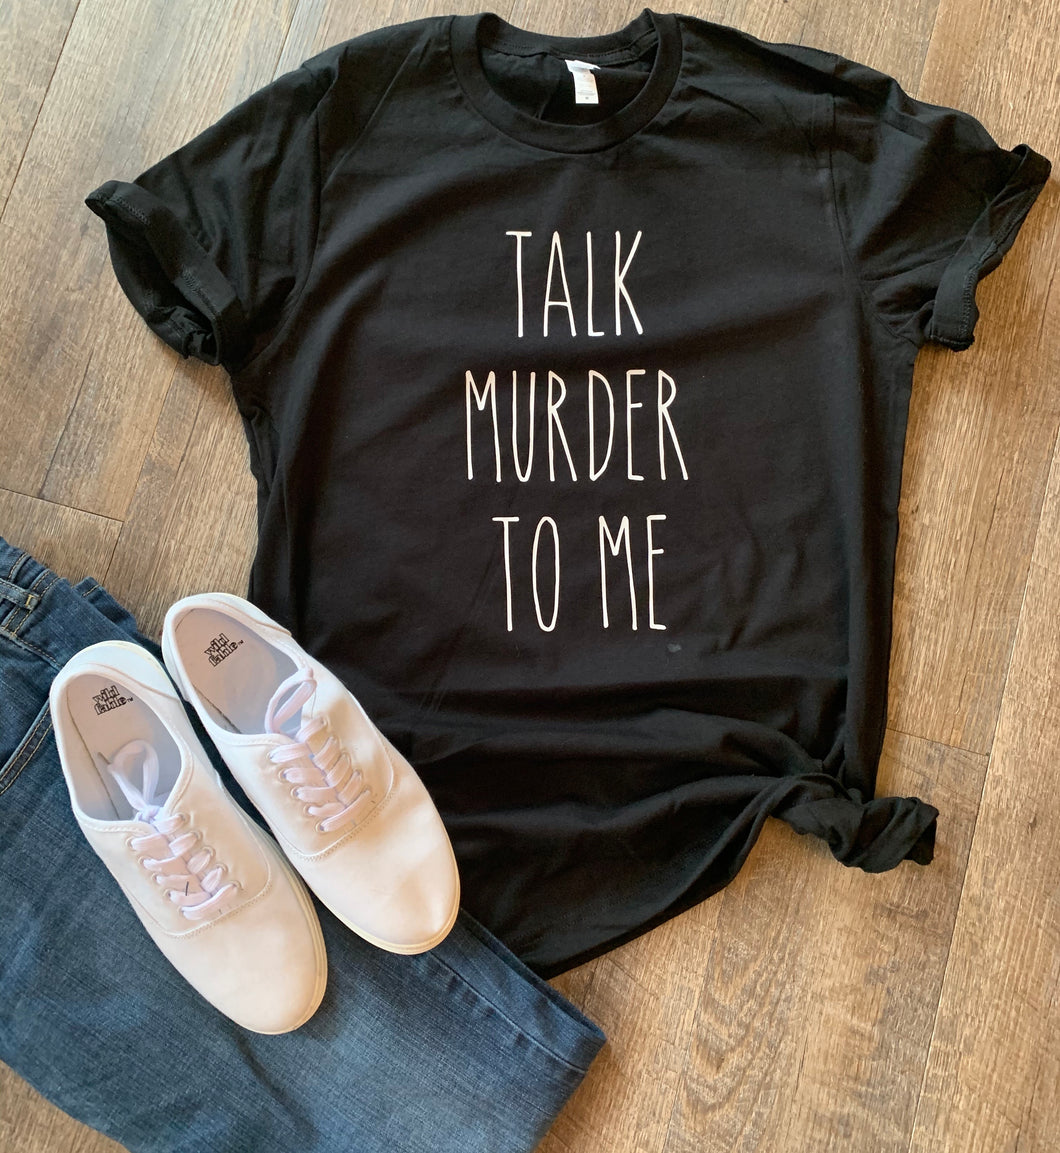 Talk murder to me funny graphic tee long sleeve crew or hoodie - Mavictoria Designs Hot Press Express